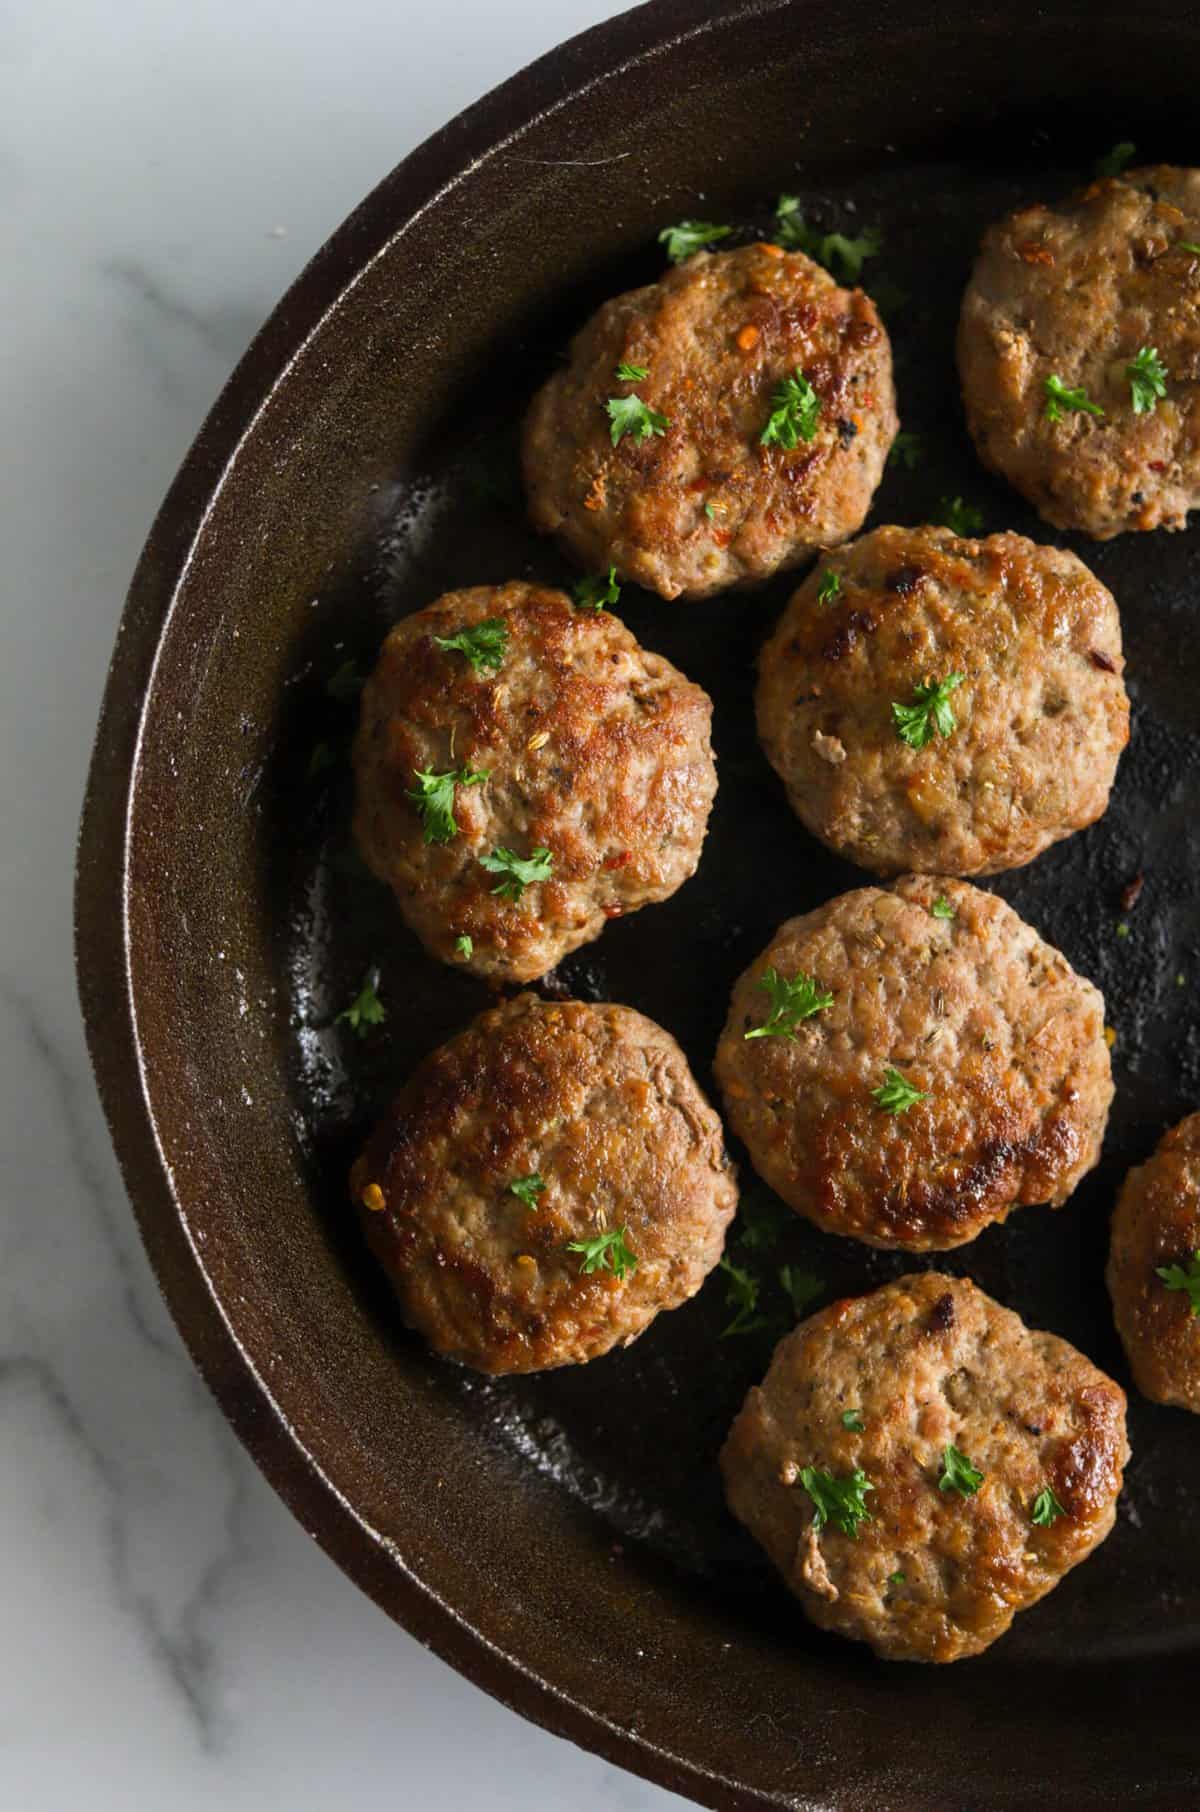 An overhead shot of a cast iron skillet with breakfast sausage patties.